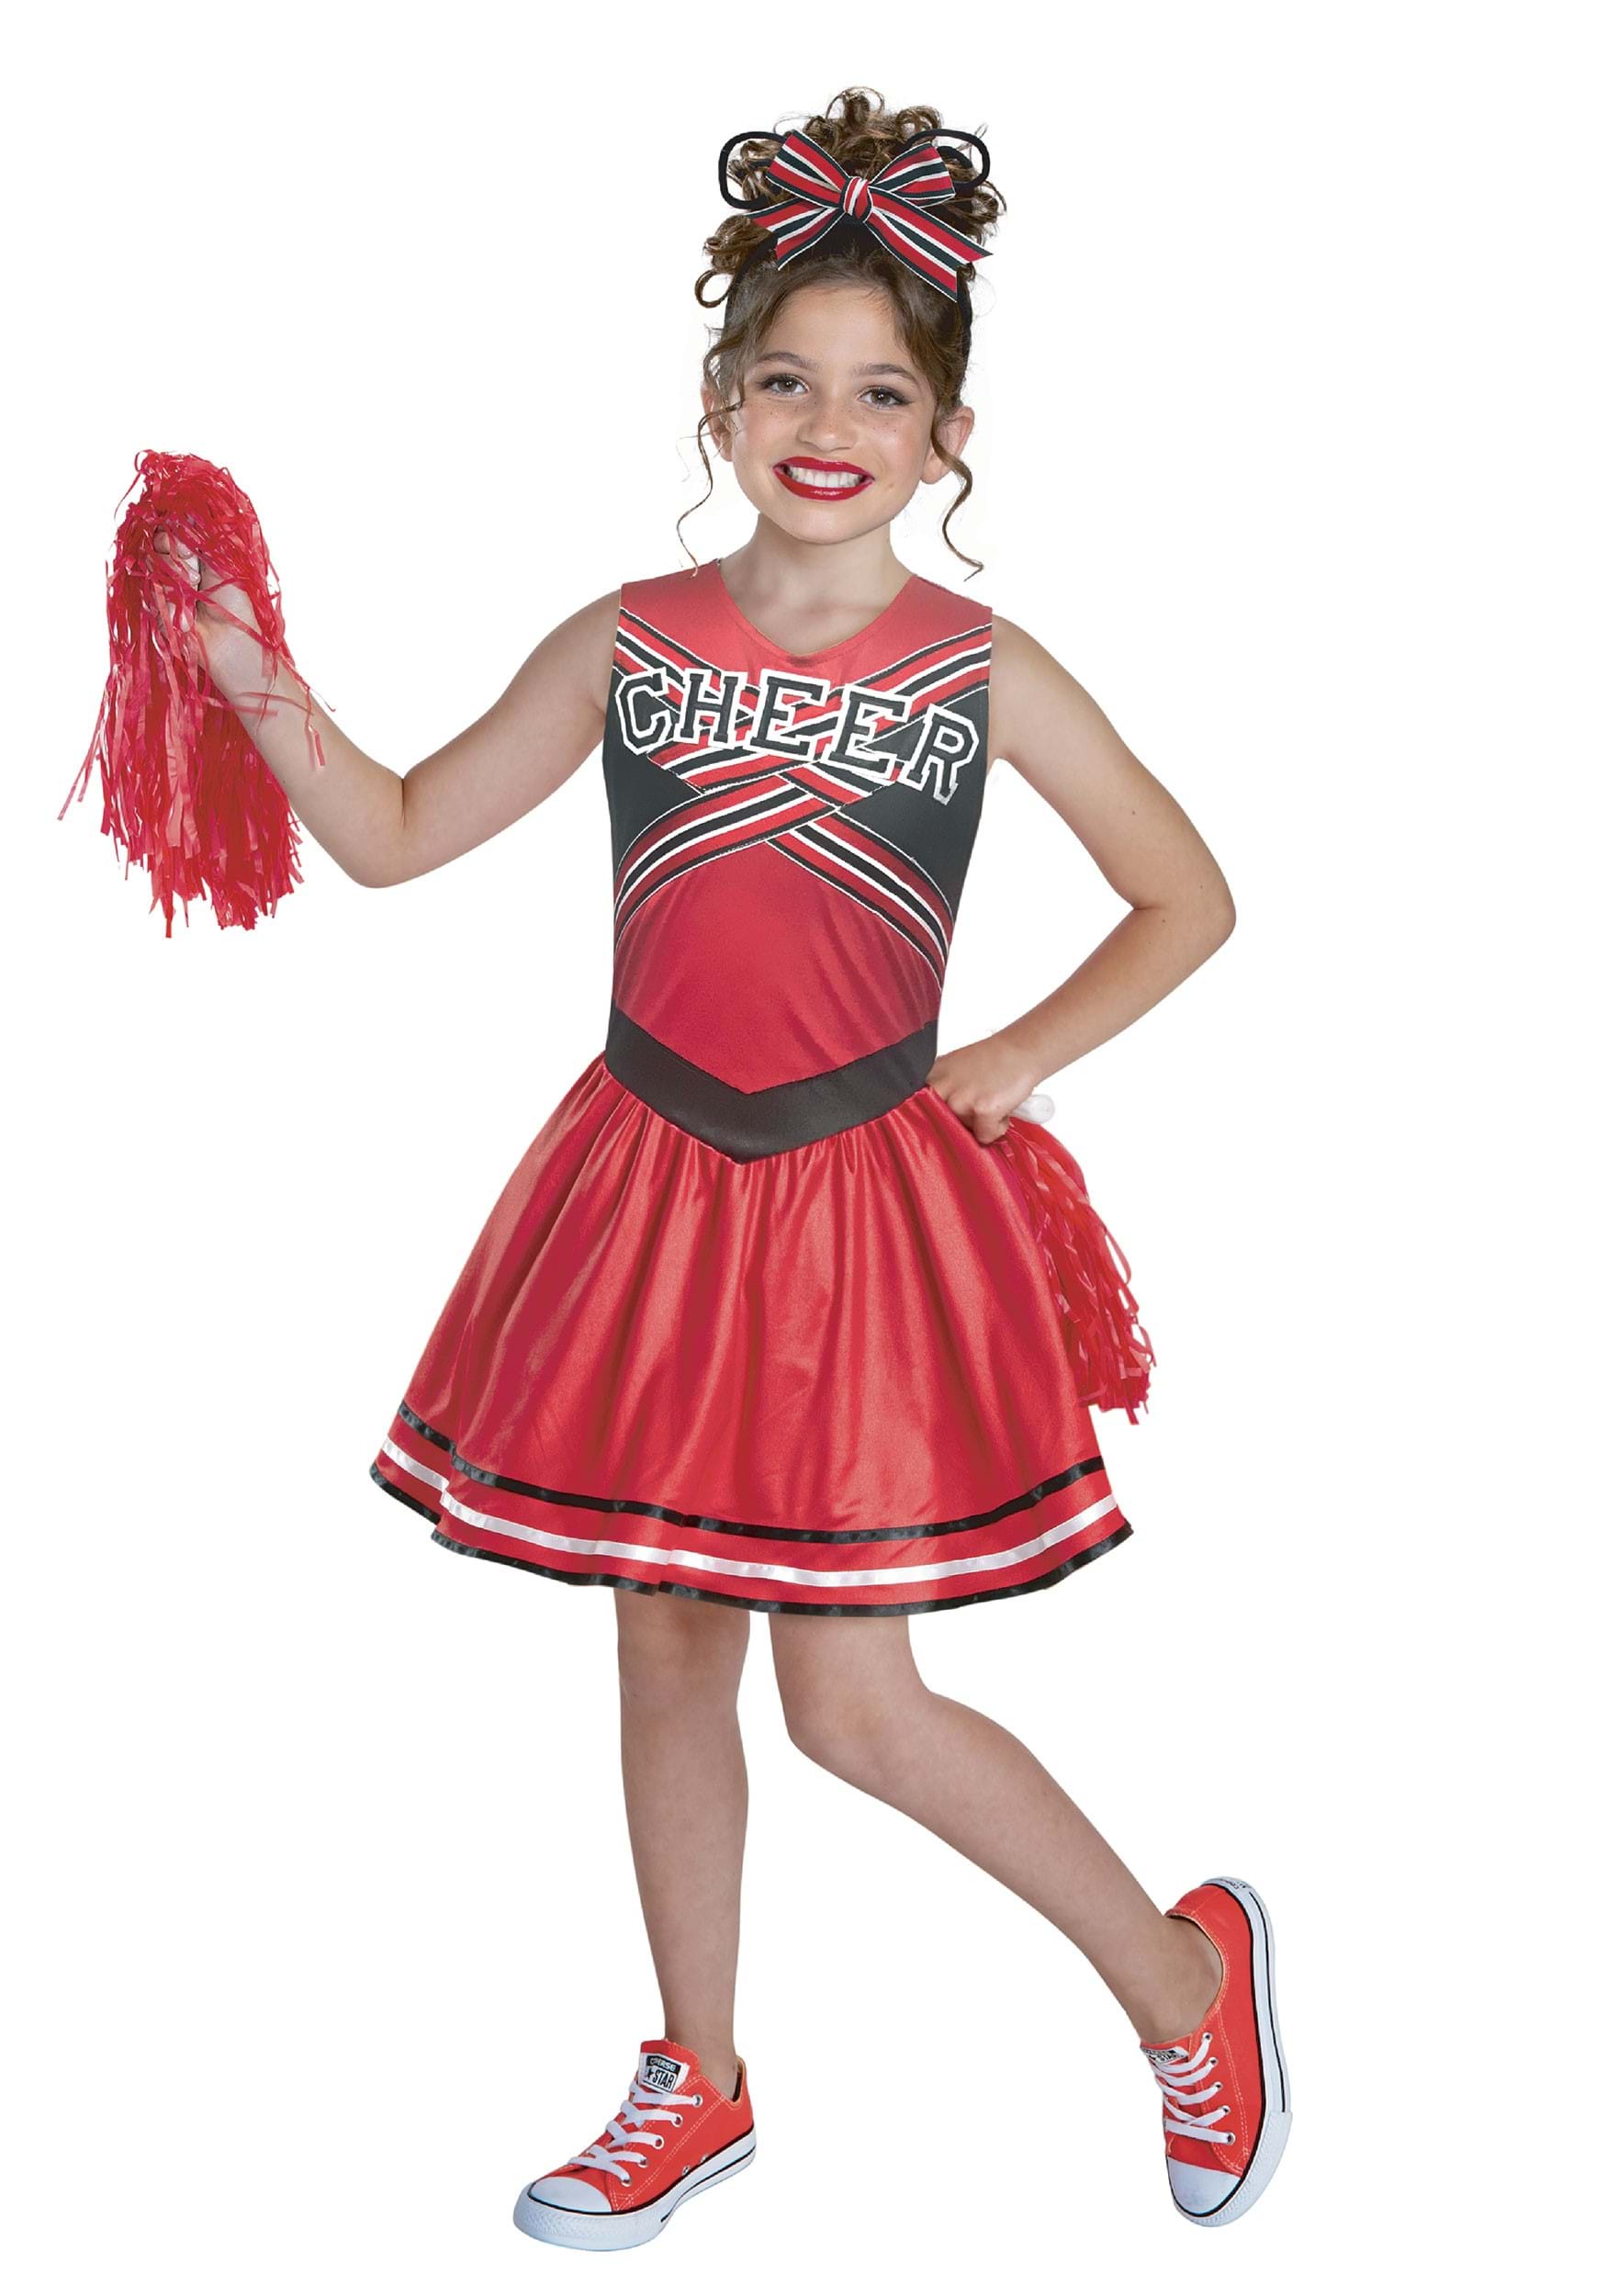 Photos - Fancy Dress IT Luggage LF Centennial Pte. Bring It Cheerleader Girls Costume Black/Red/Wh 